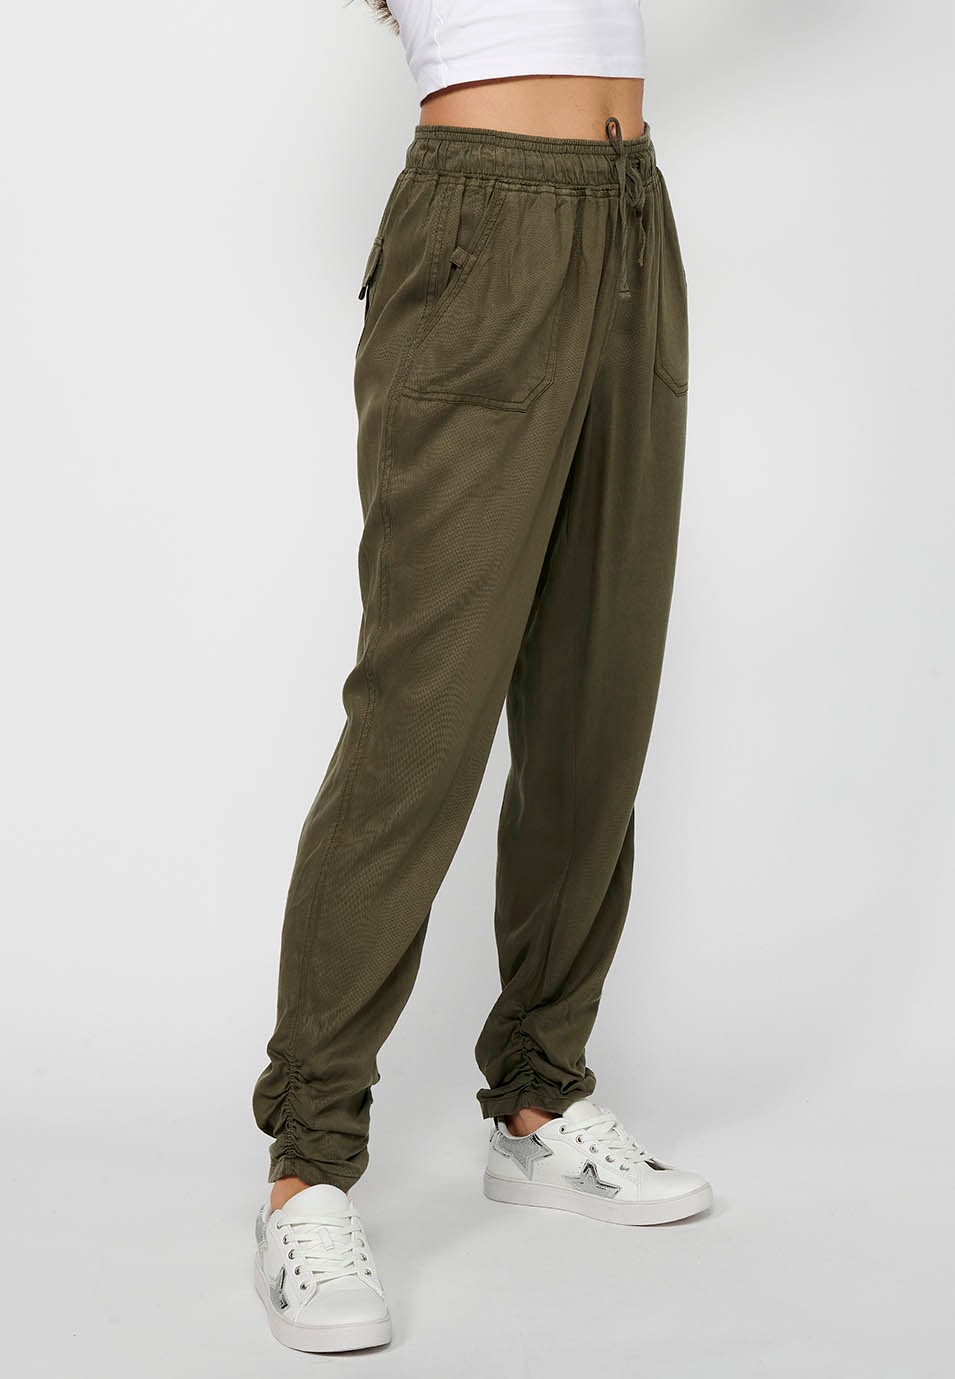 Long jogger pants with curled finish and rubberized waist with four pockets, two rear pockets with flap in Khaki color for women 3